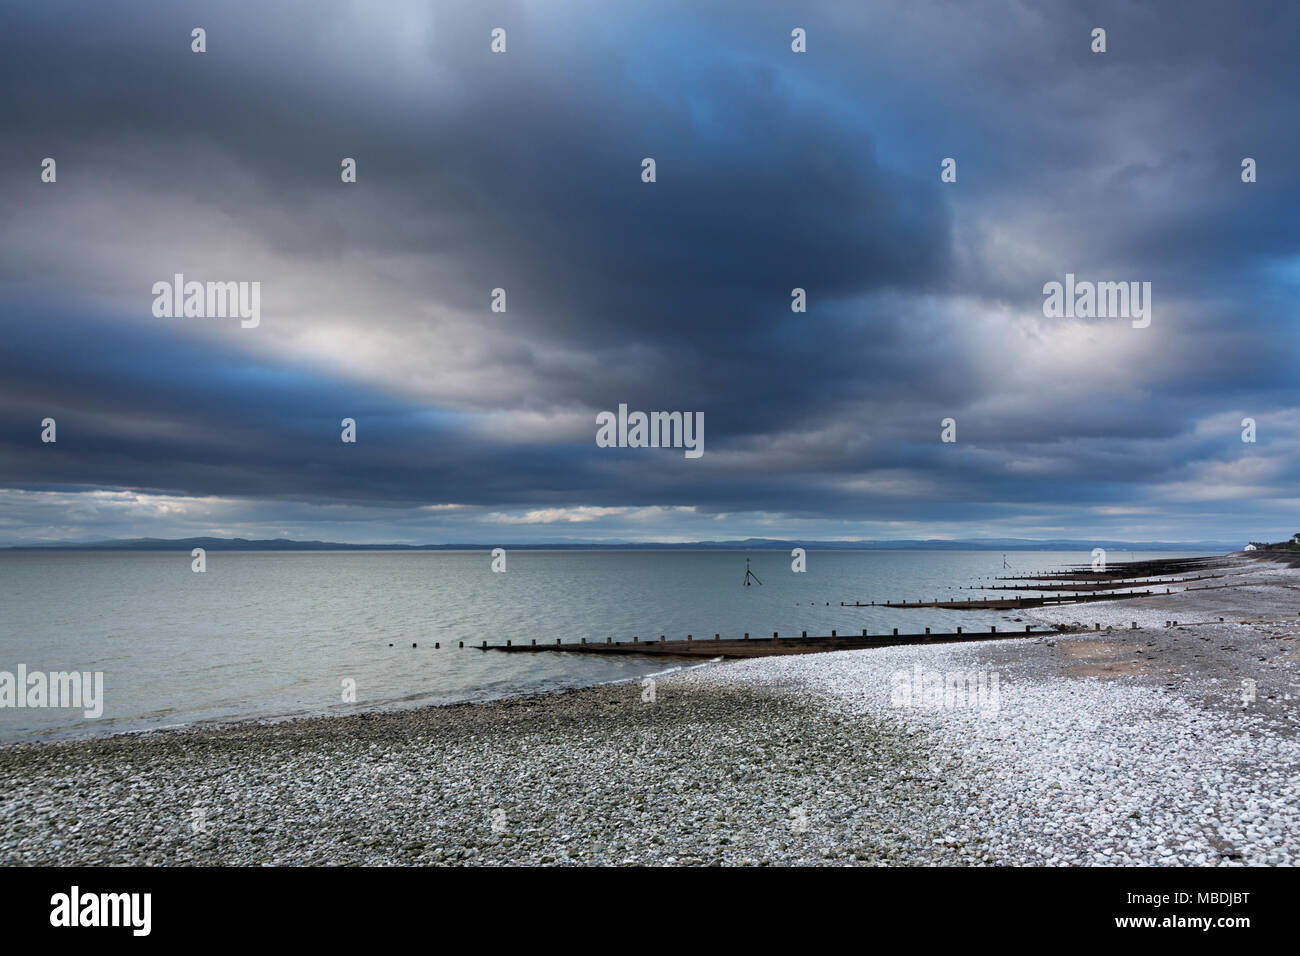 Snow on stormy, remote ocean beach, Silloth, Cumbria, UK Stock Photo